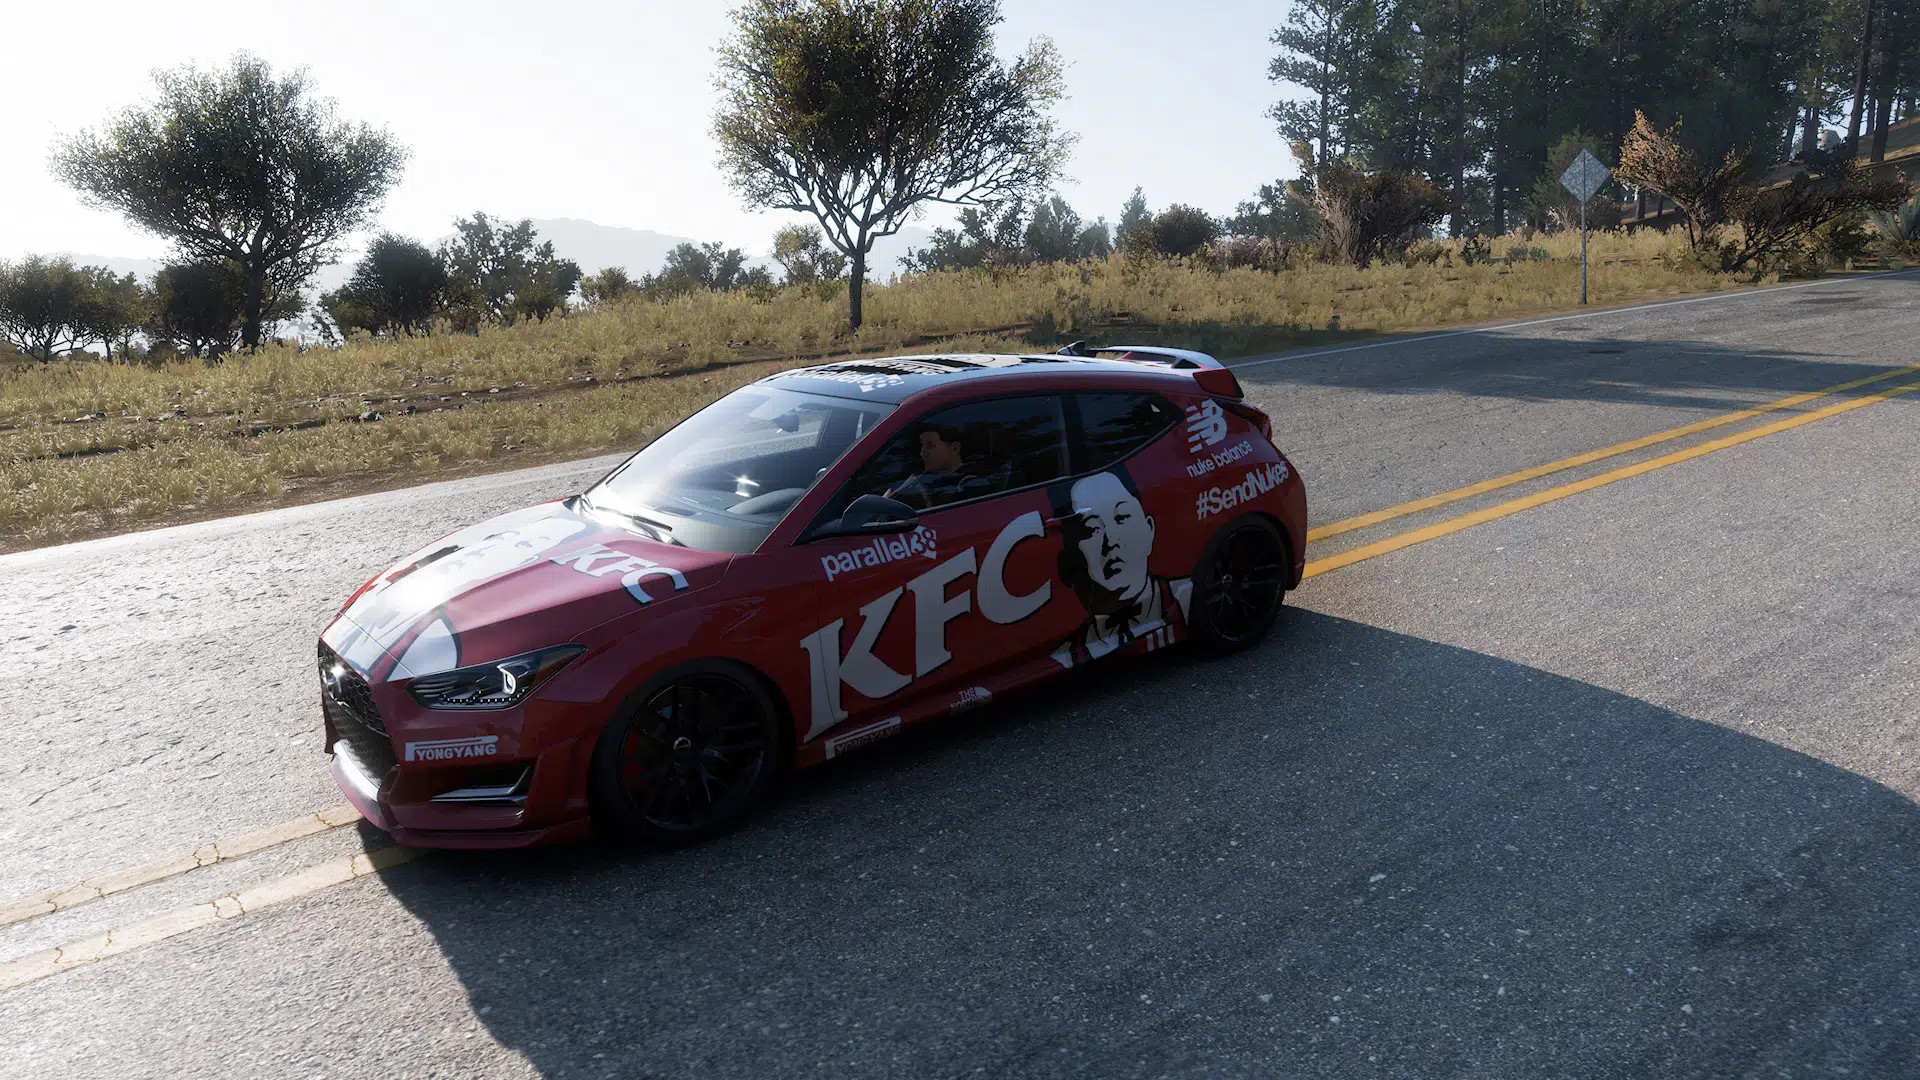 The reason why the Forza game user had a permanent van in 8,000 years.